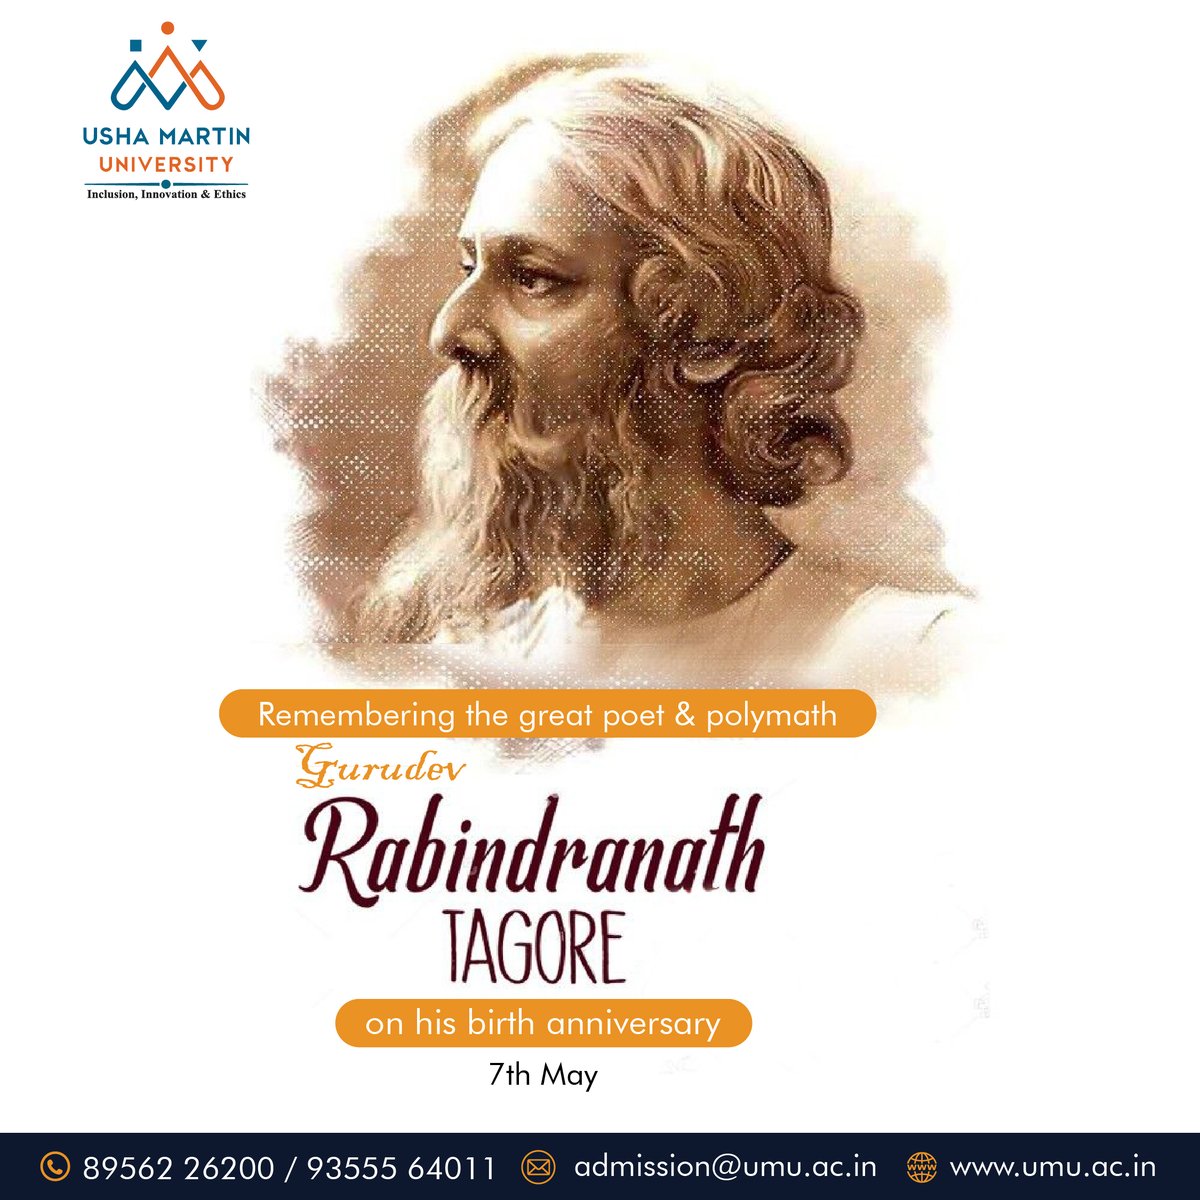 Saluting the timeless wisdom and literary legacy of Rabindranath Tagore on his birth anniversary.
#RabindranathTagore #PoeticGenius #literature #ushamartinuniversity #birthanniversary